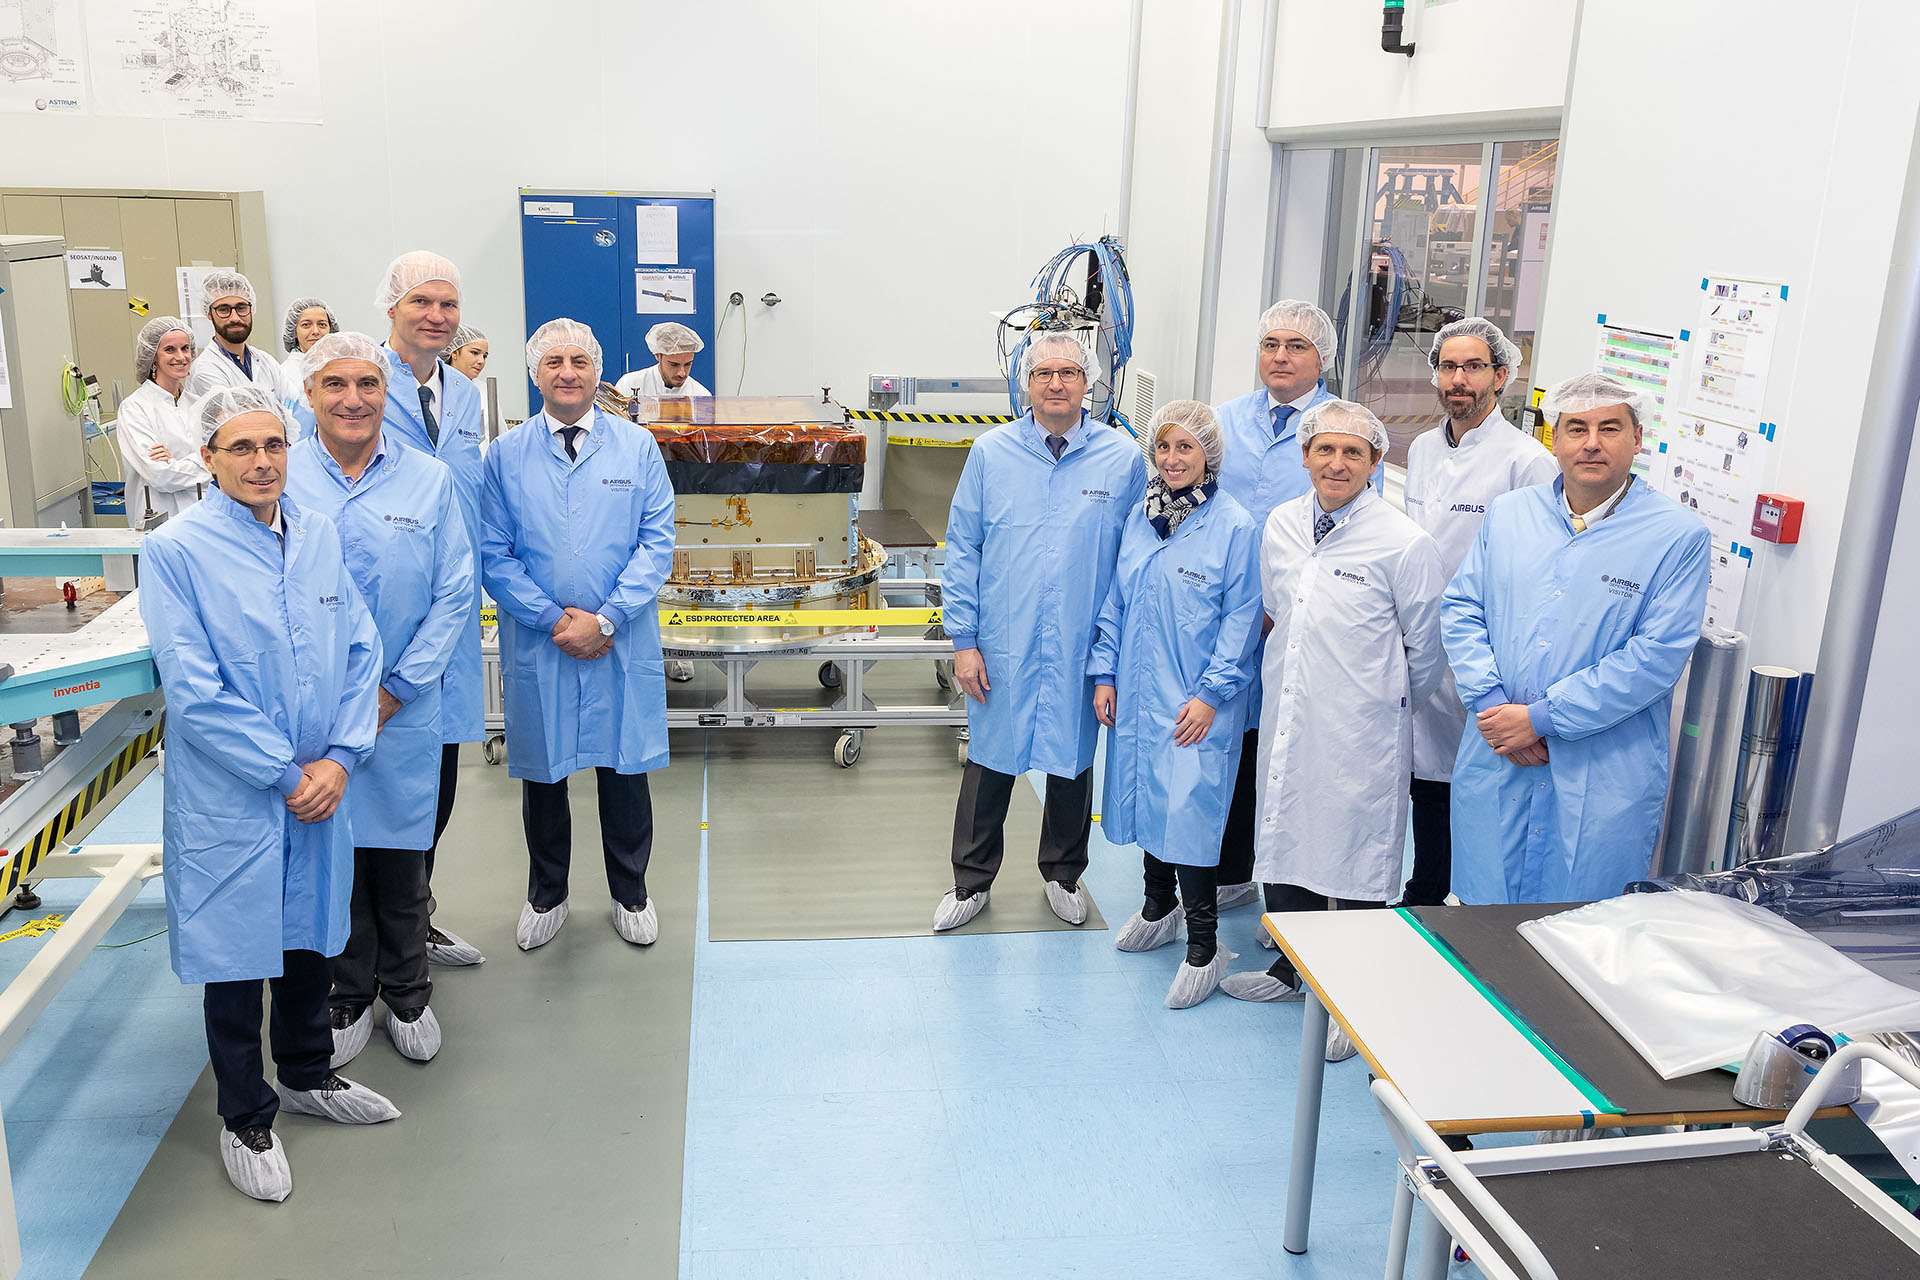 Representatives from Eutelsat, Airbus, the Spanish Centre for the Development of Industrial Technology and ESA with the Quantum active array antenna developed by Airbus Spain. Image credit: Airbus